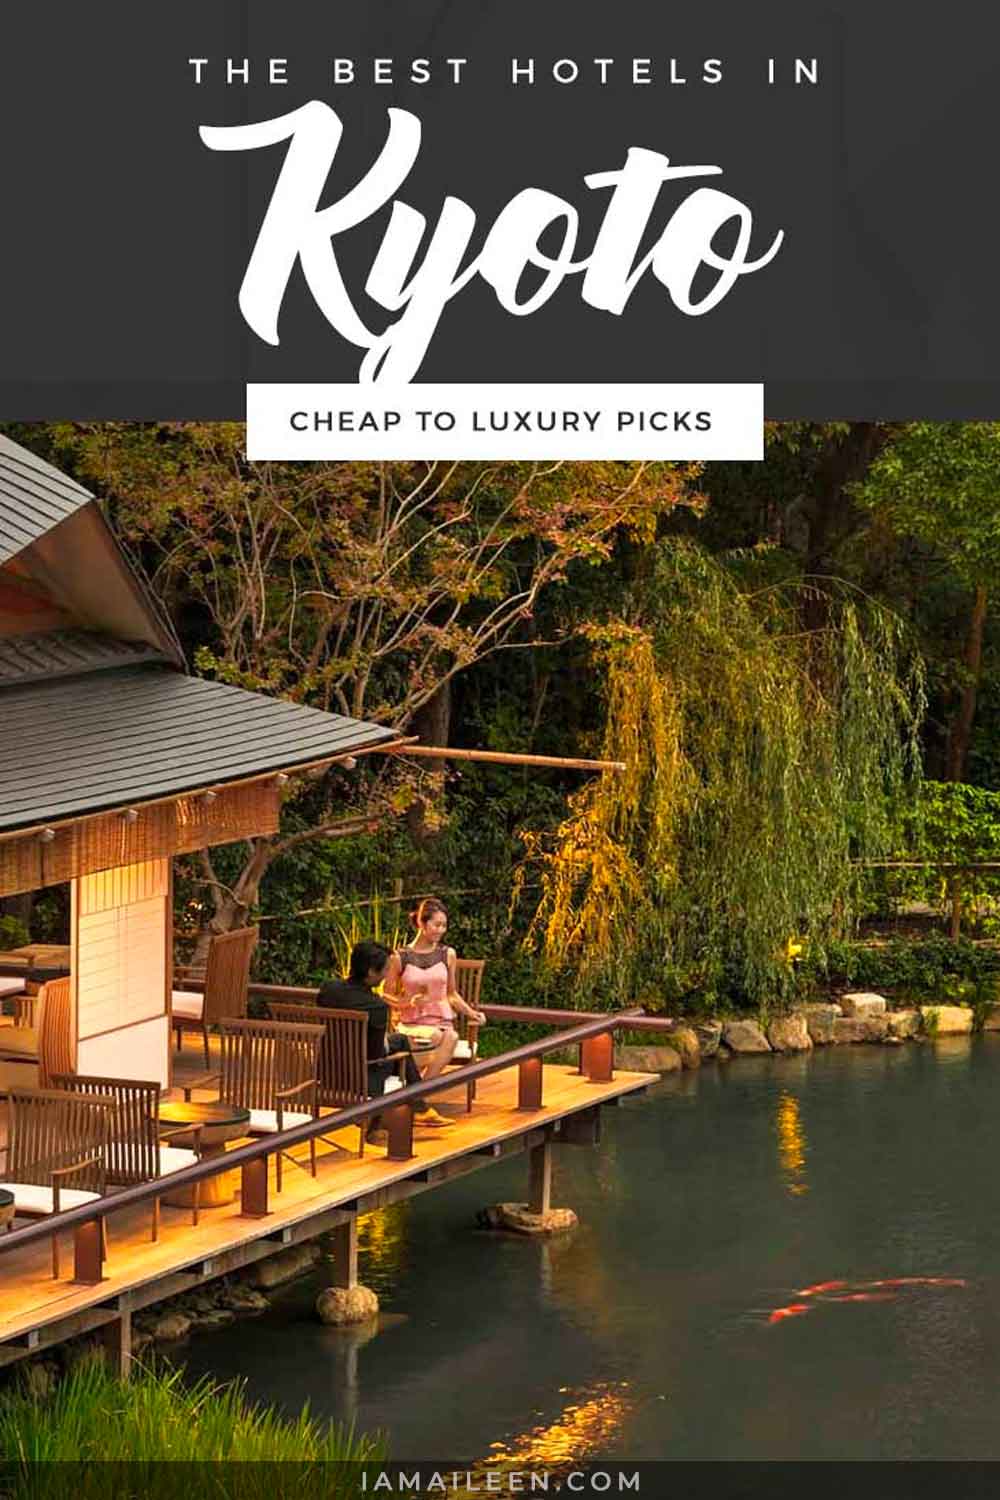 The Best Hotels in Kyoto, Japan: Cheap to Luxury Picks